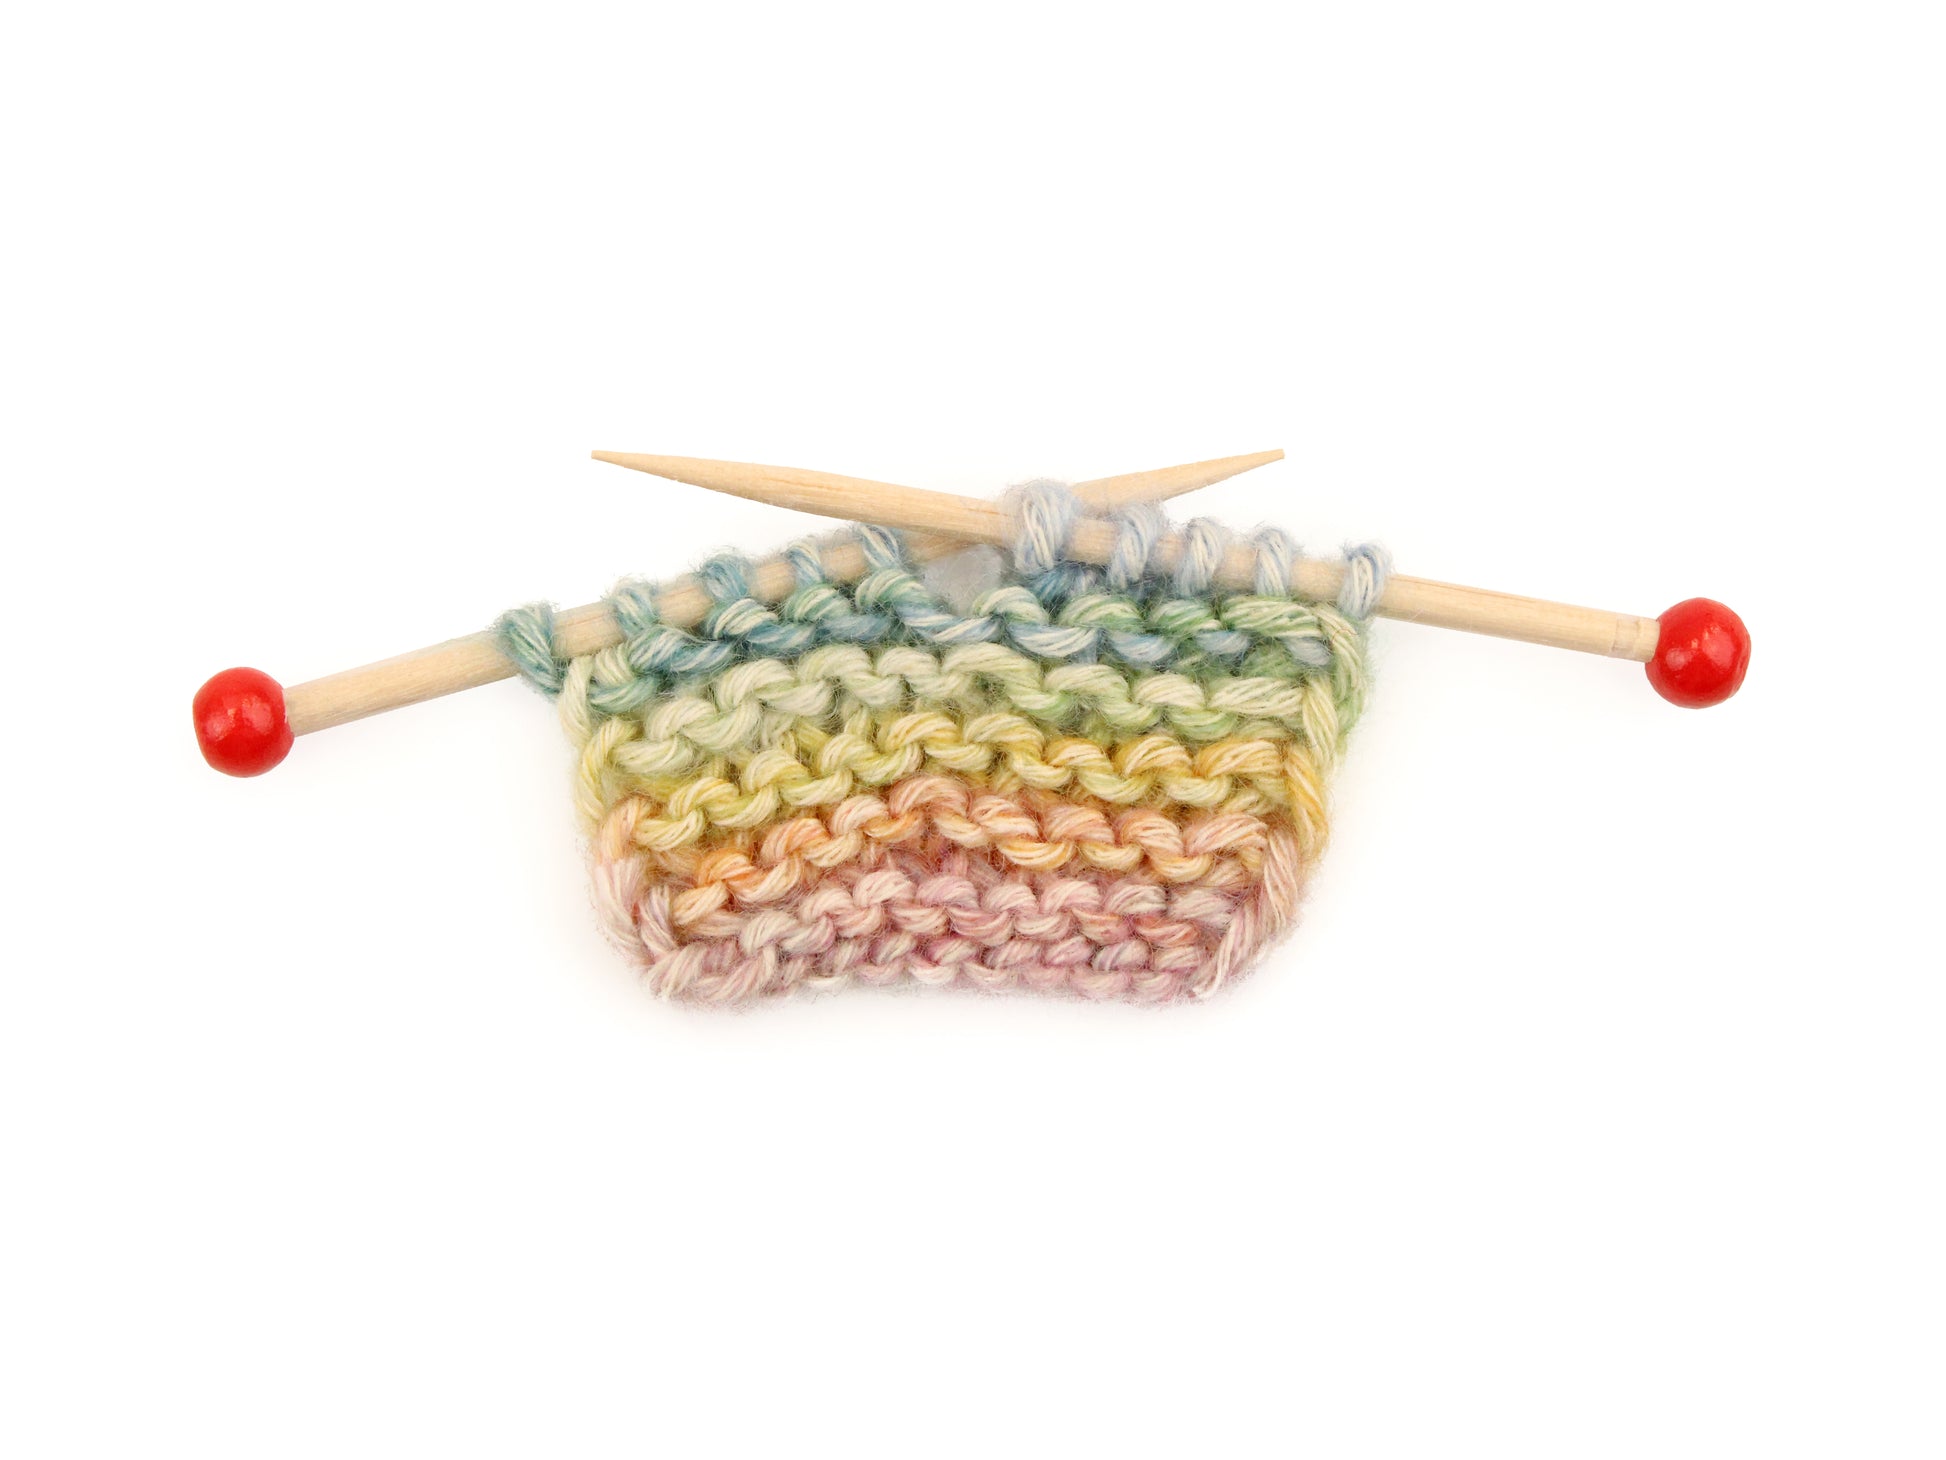 Mini Knitting Accessory for Needle Felting Characters - The Makerss